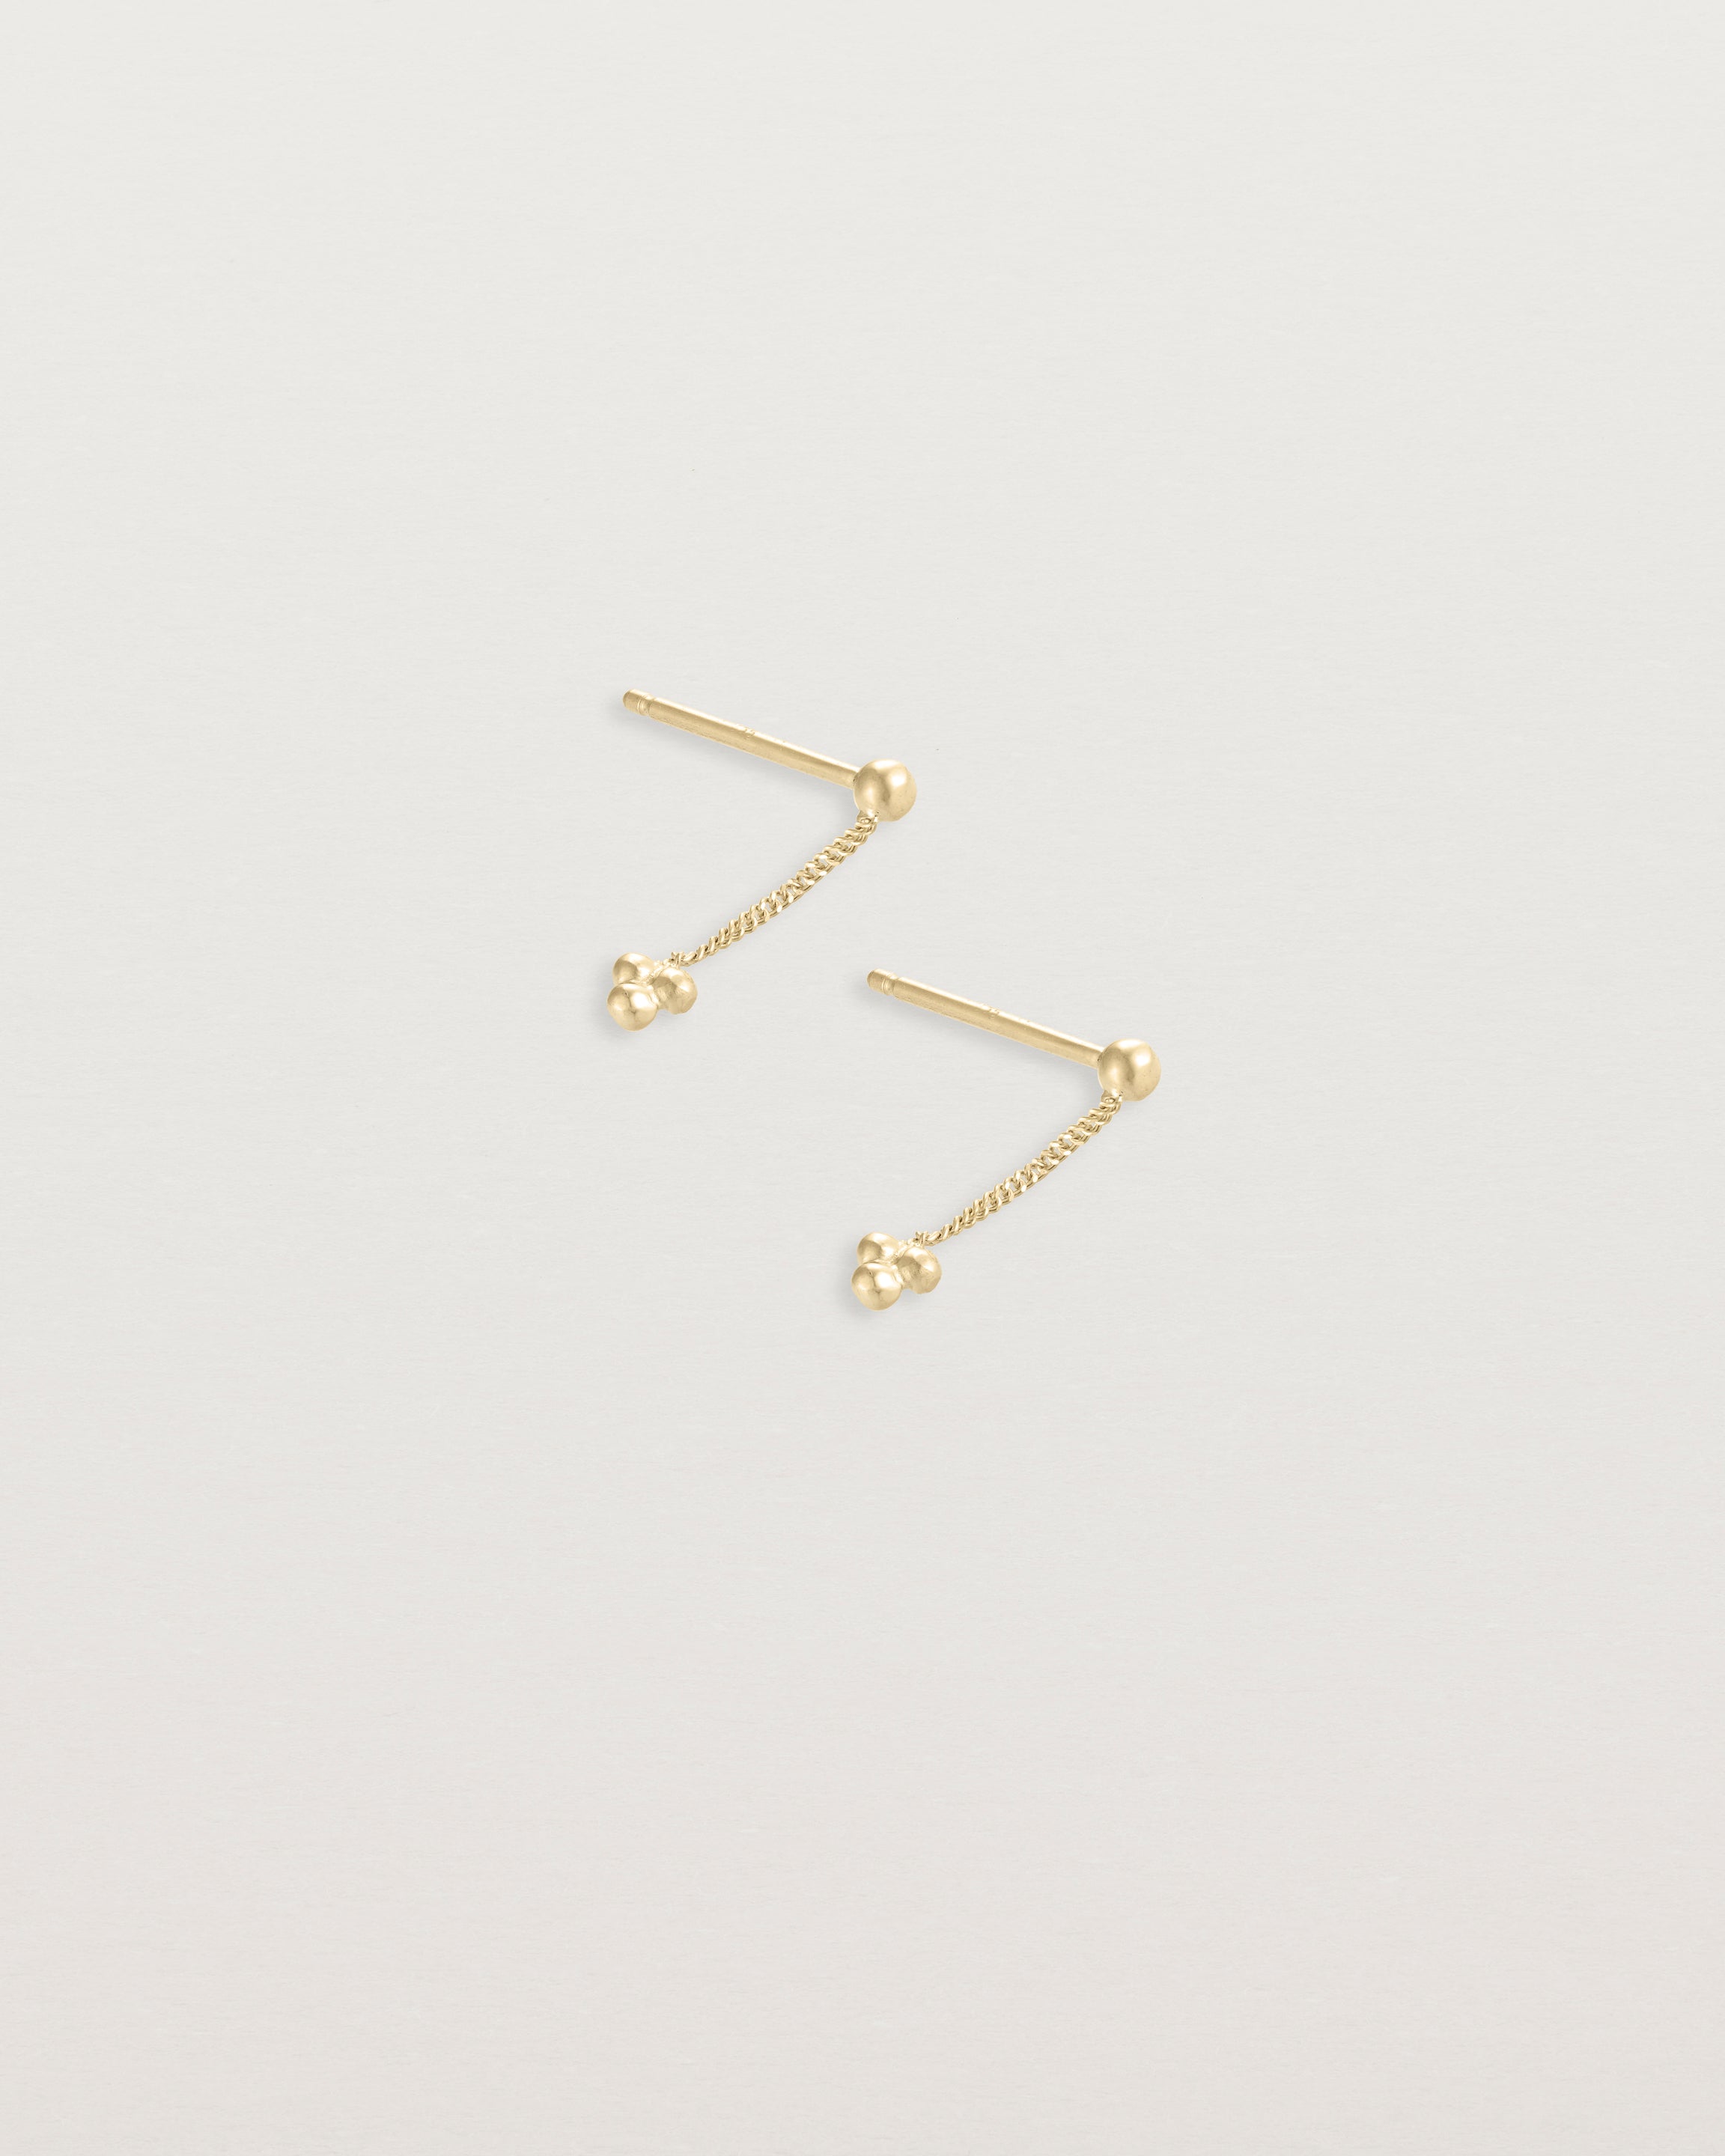 A pair of Tellue Drop Studs in Yellow Gold.